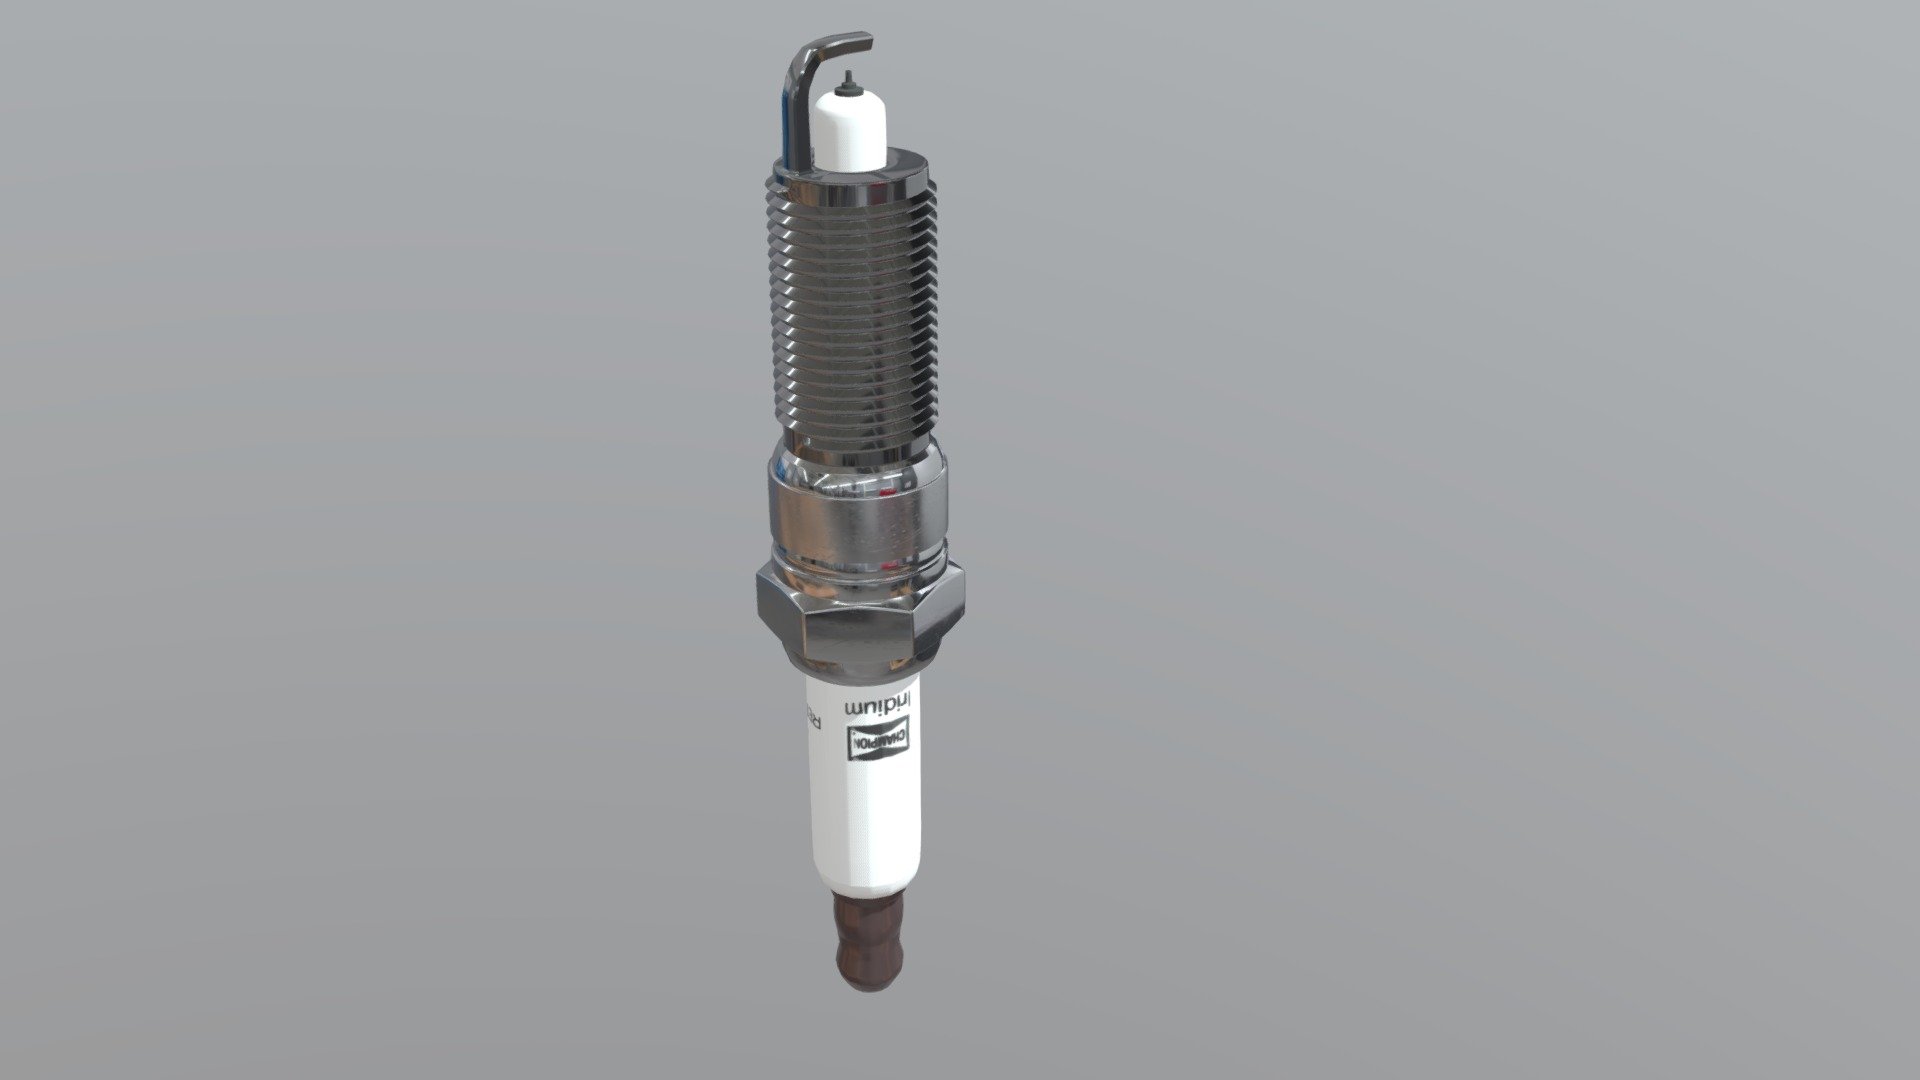 Just a quick model for a test - Spark Plug - 3D model by nickbot 3d model